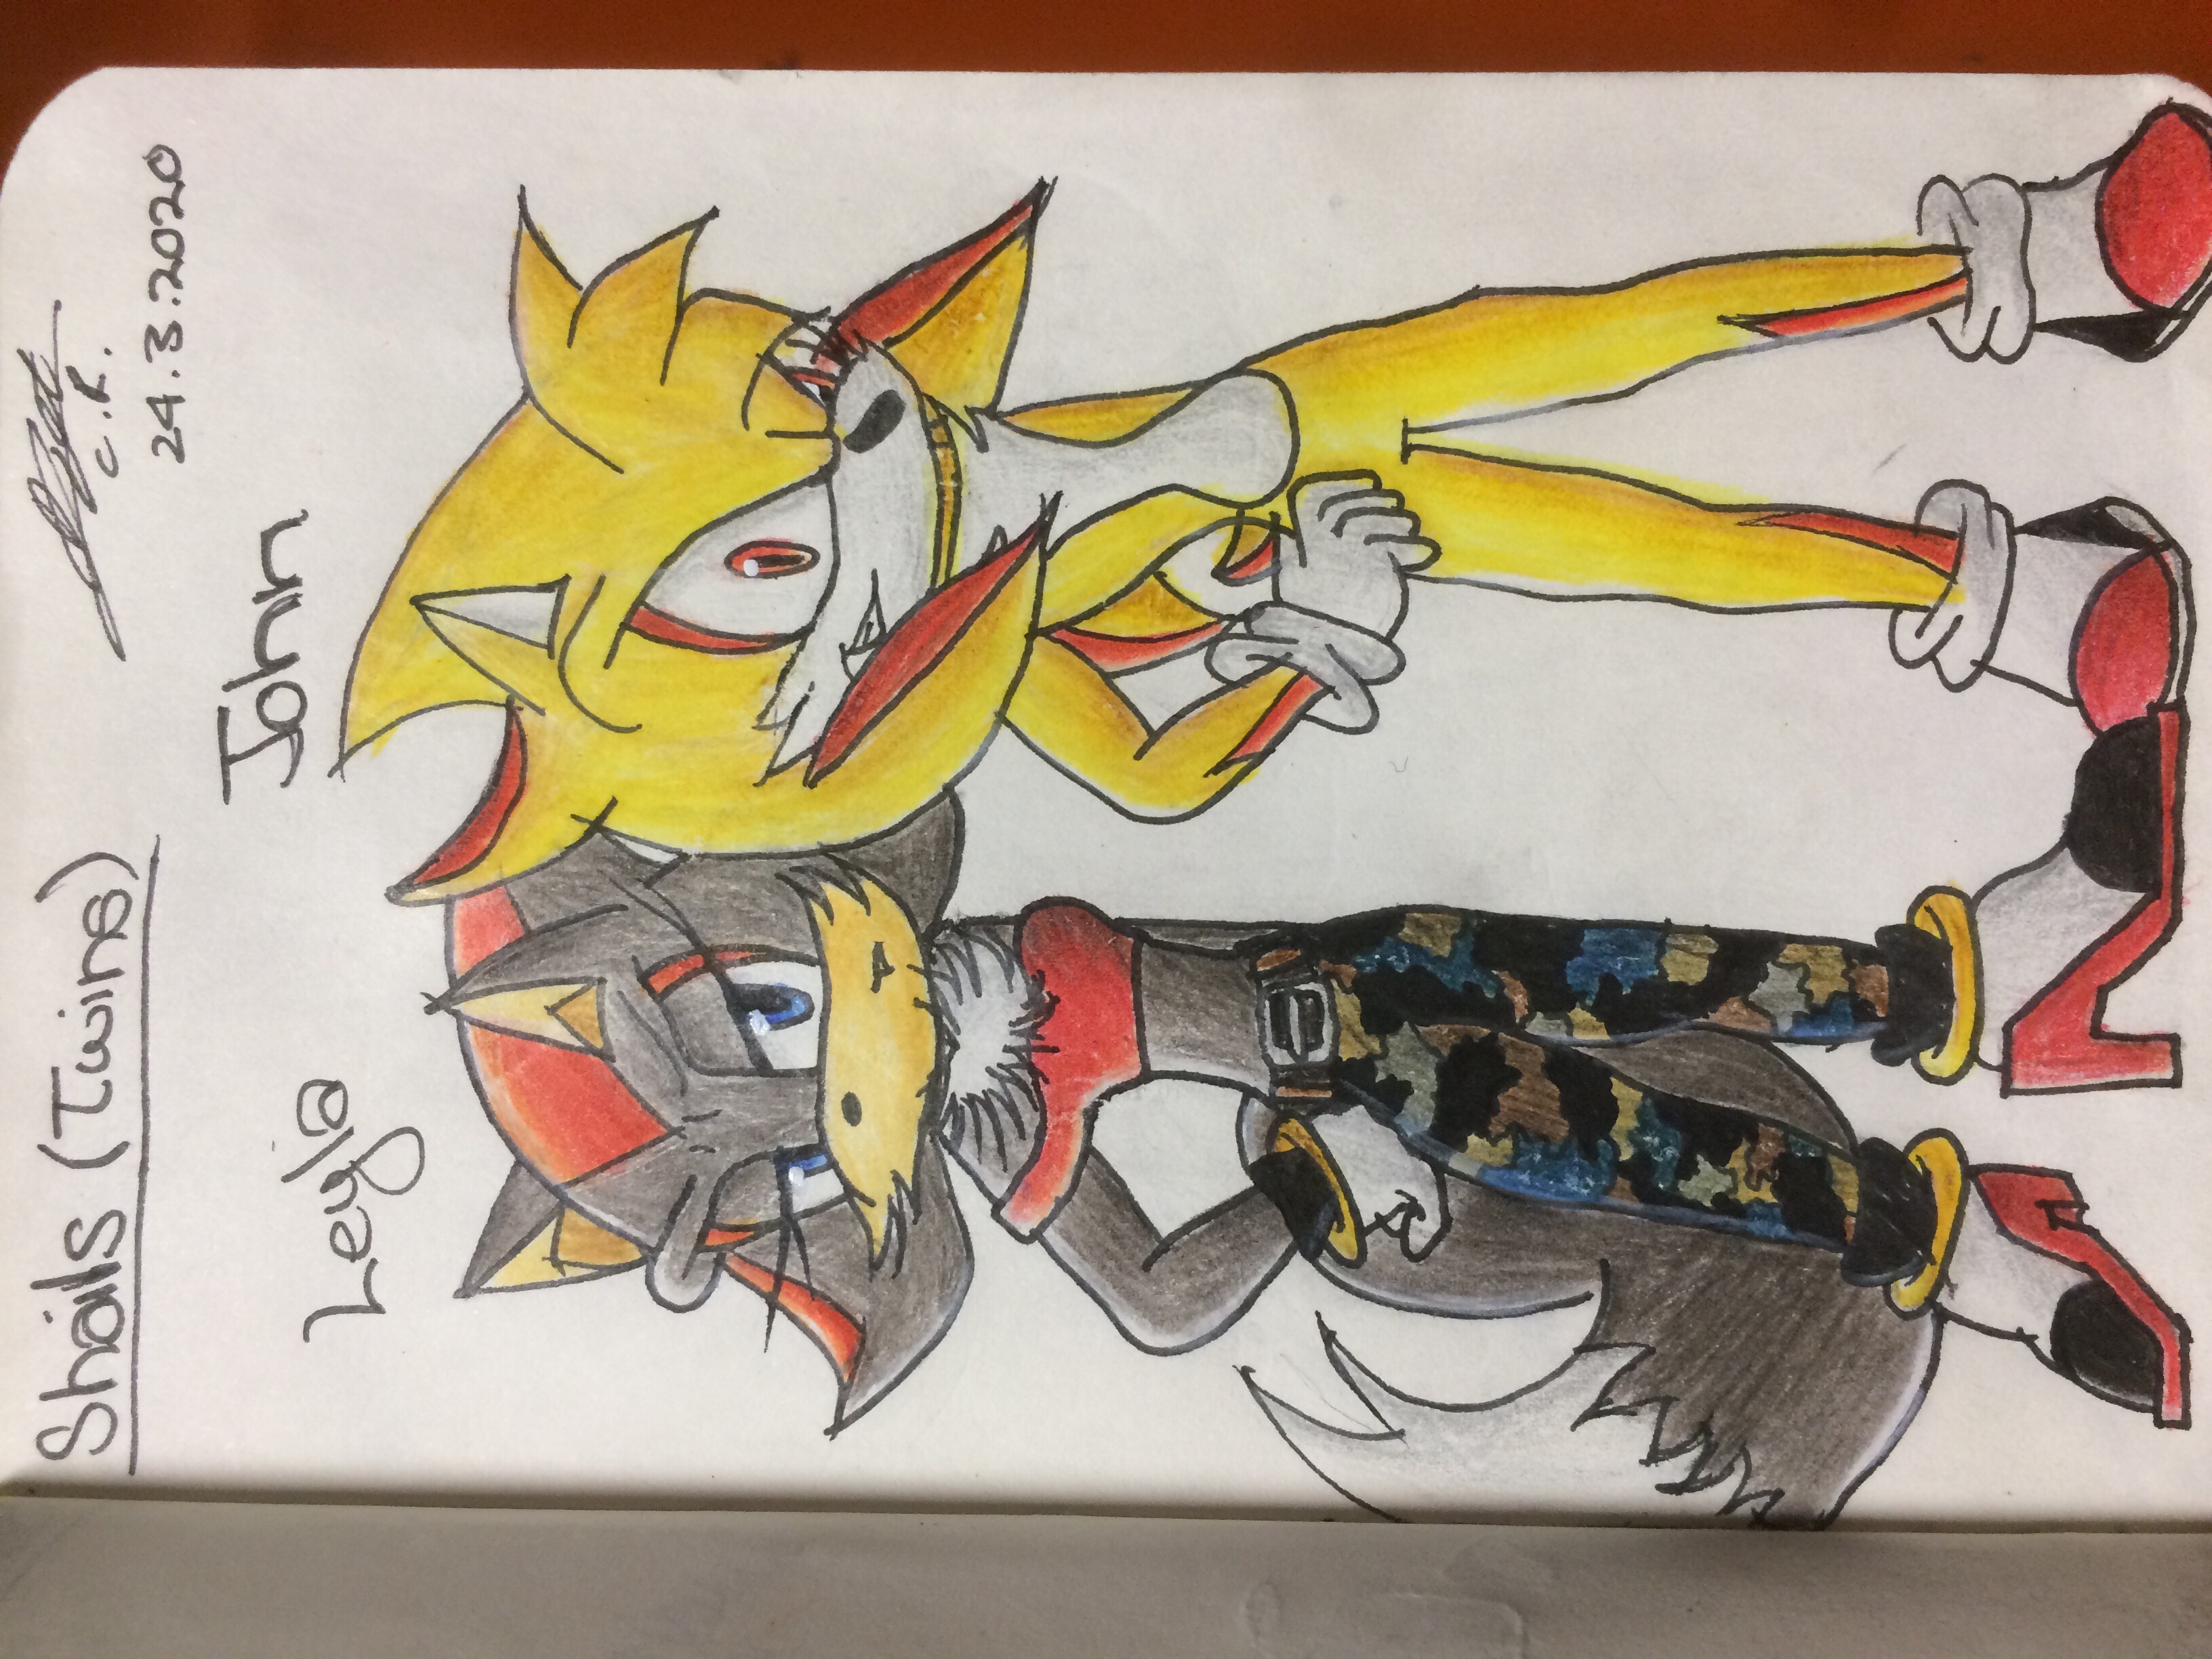 Shadow x SNT Ship Kid by FanGirlStephie on DeviantArt